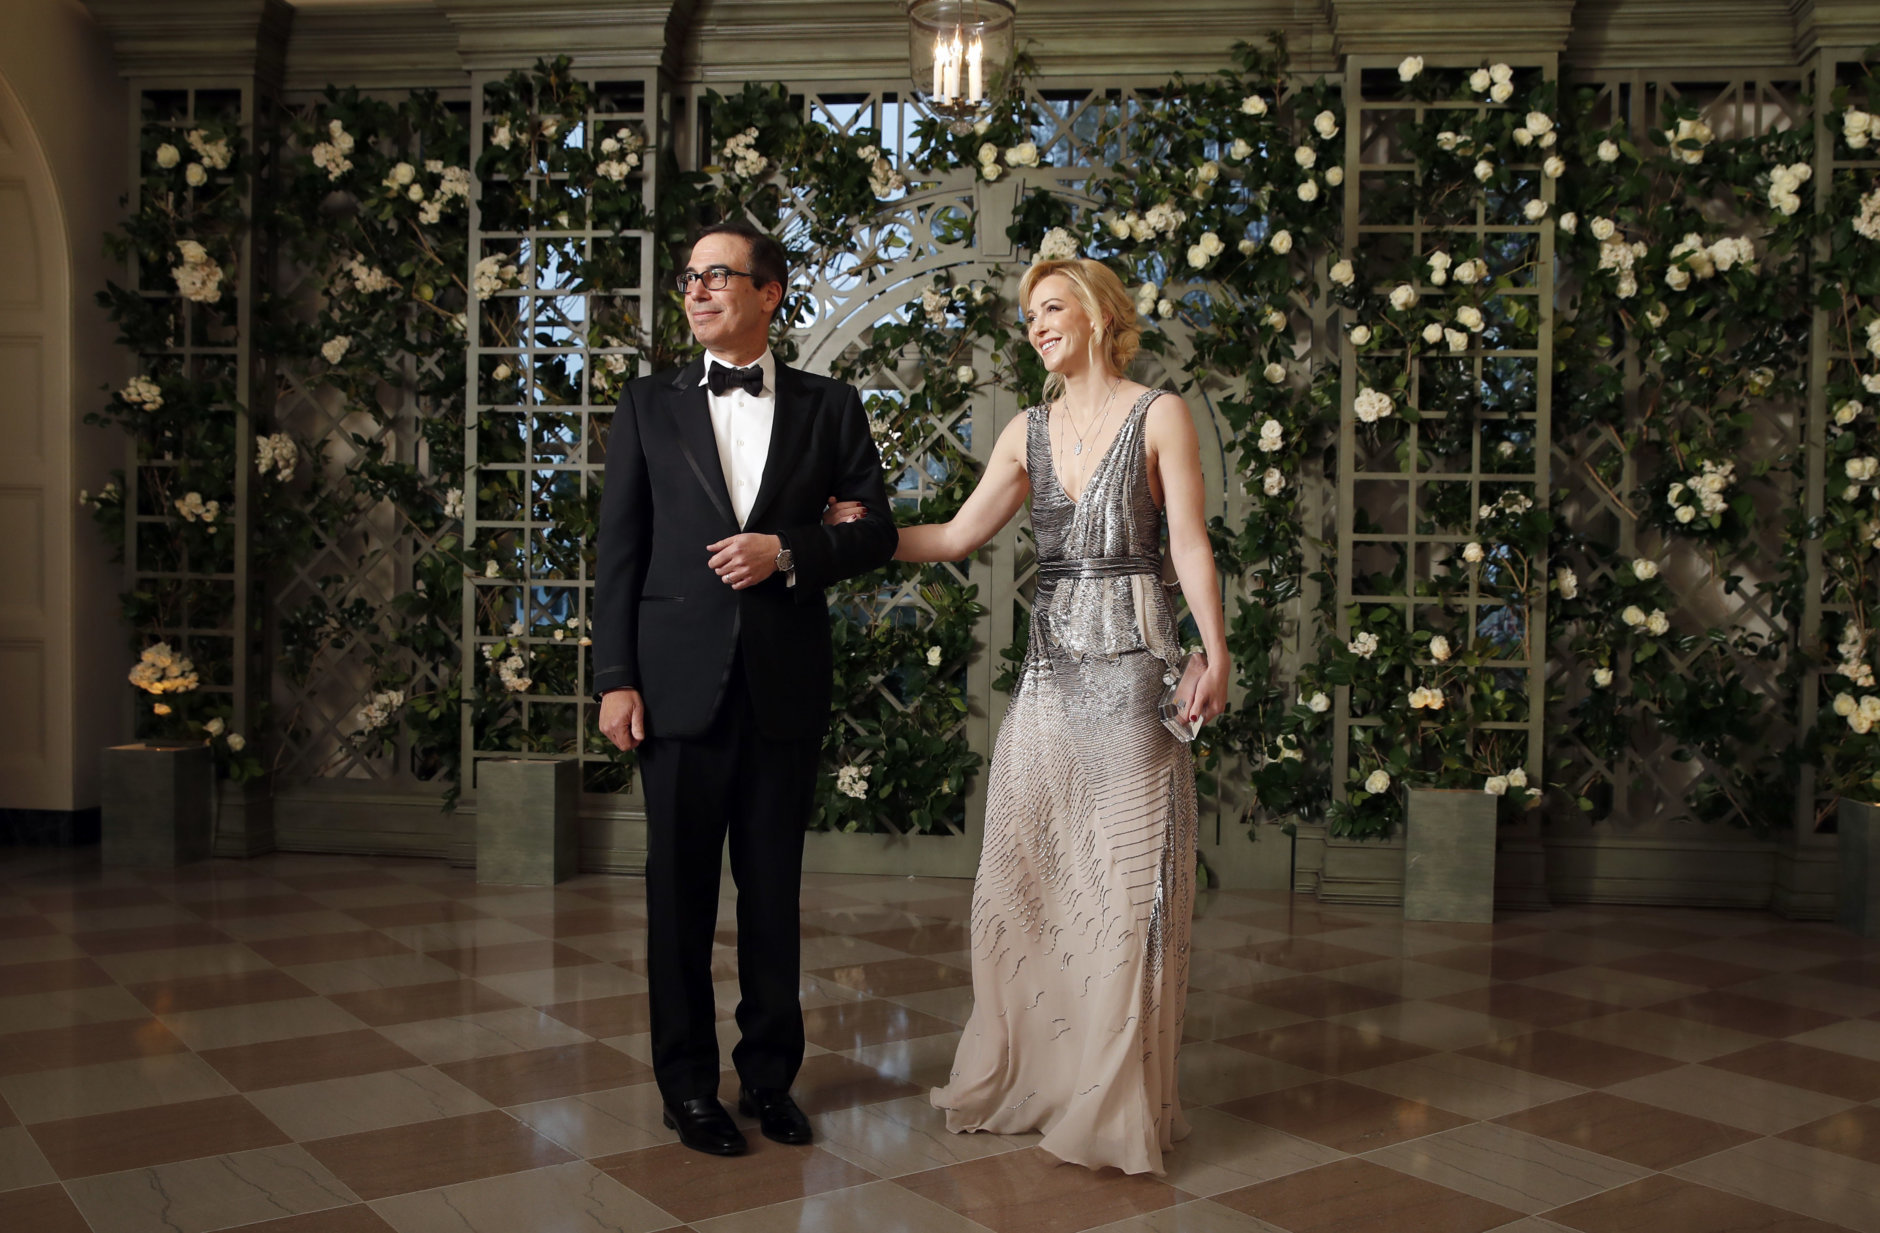 Treasury Secretary Steve Mnuchin and his wife Louise Linton arrive for a State Dinner with French President Emmanuel Macron and President Donald Trump at the White House, Tuesday, April 24, 2018, in Washington. (AP Photo/Alex Brandon)